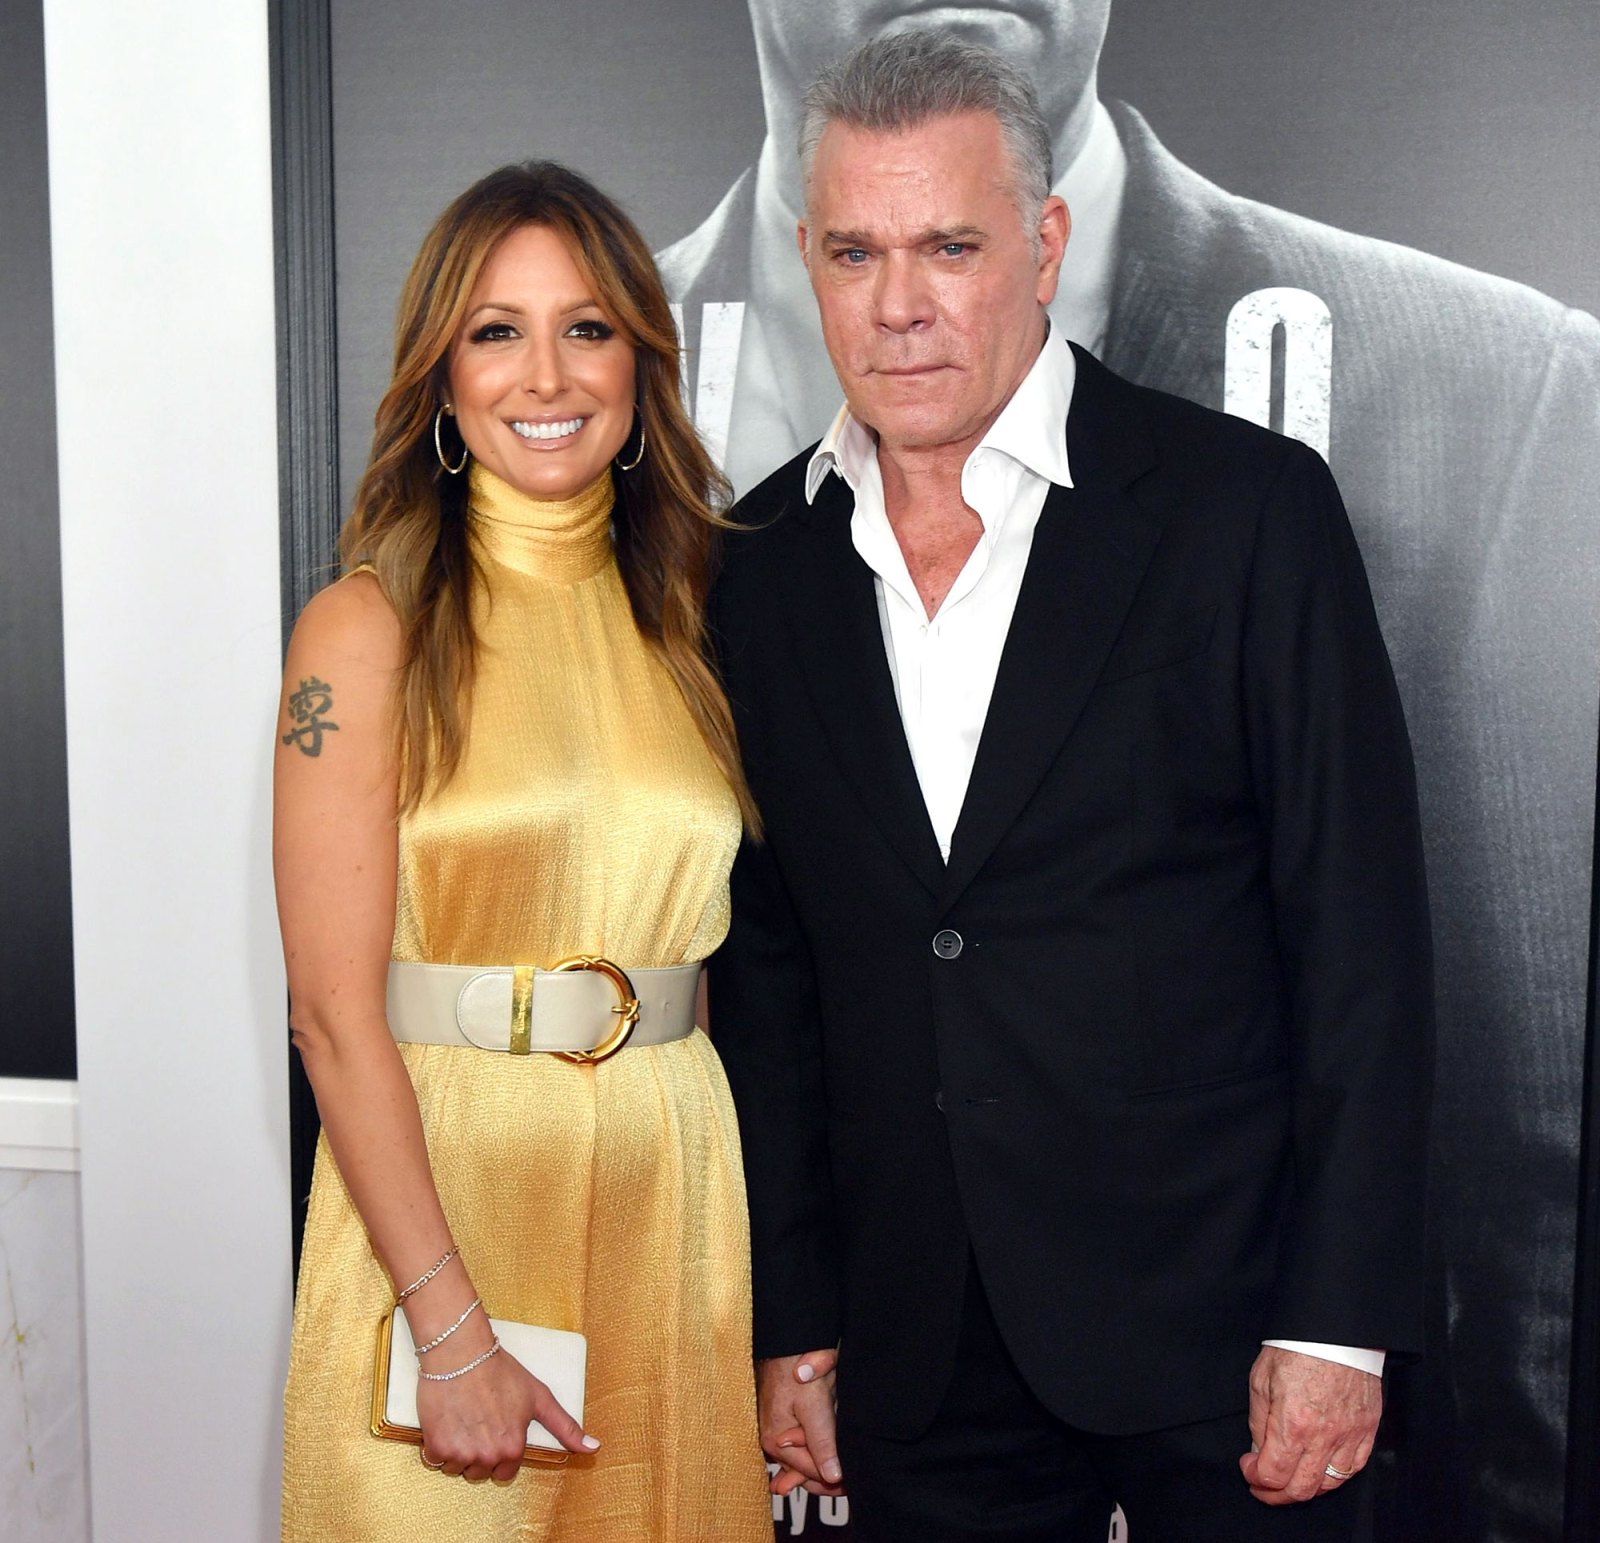 Ray Liotta Is Dead at 67 5 Things to Know About His Fiance Jacy Nittolo